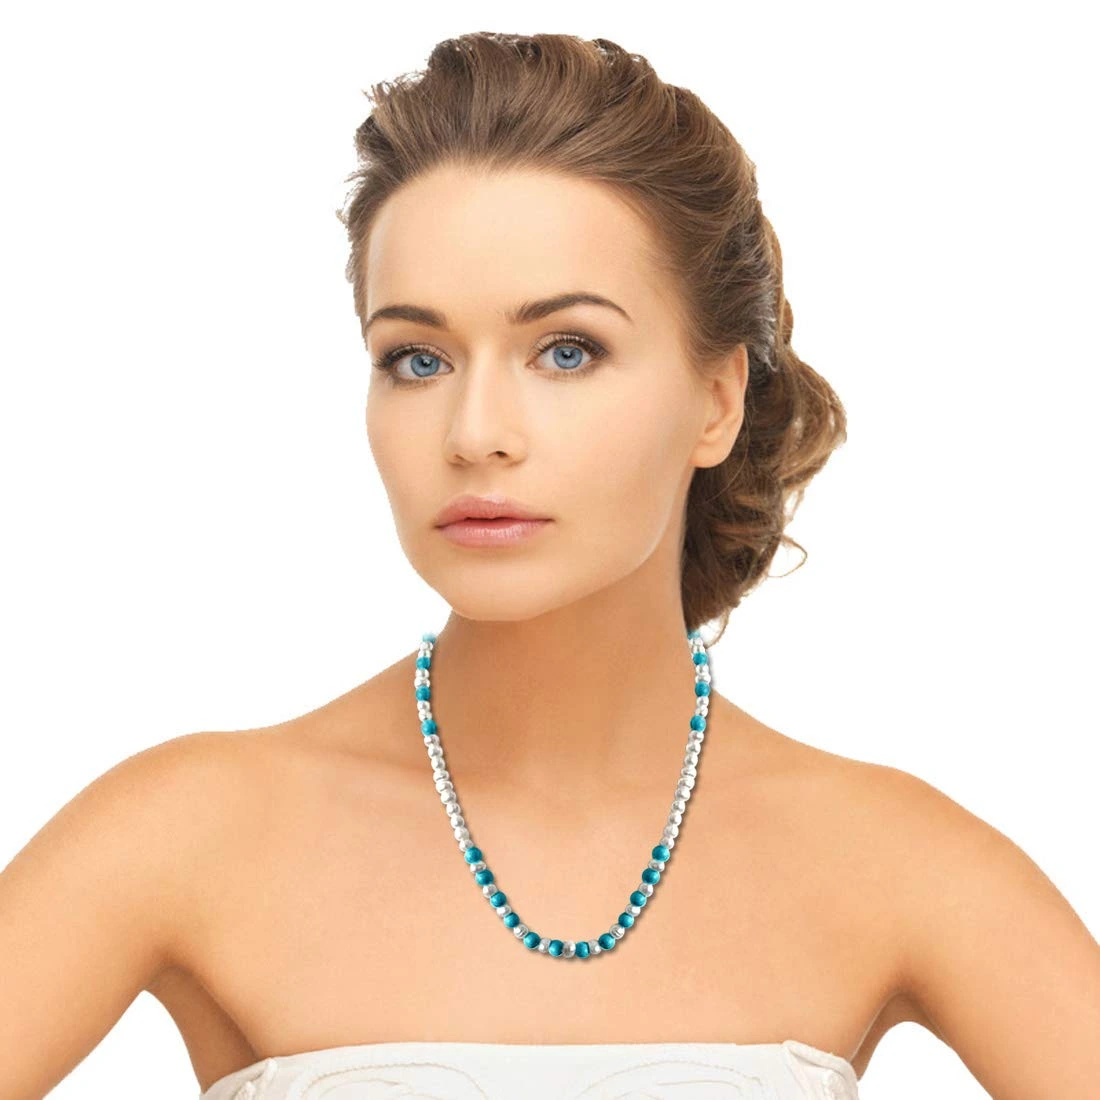 Beautiful Intoxication - Single Line Real Freshwater Pearl & Turquoise Beads Necklace for Women (SN22)